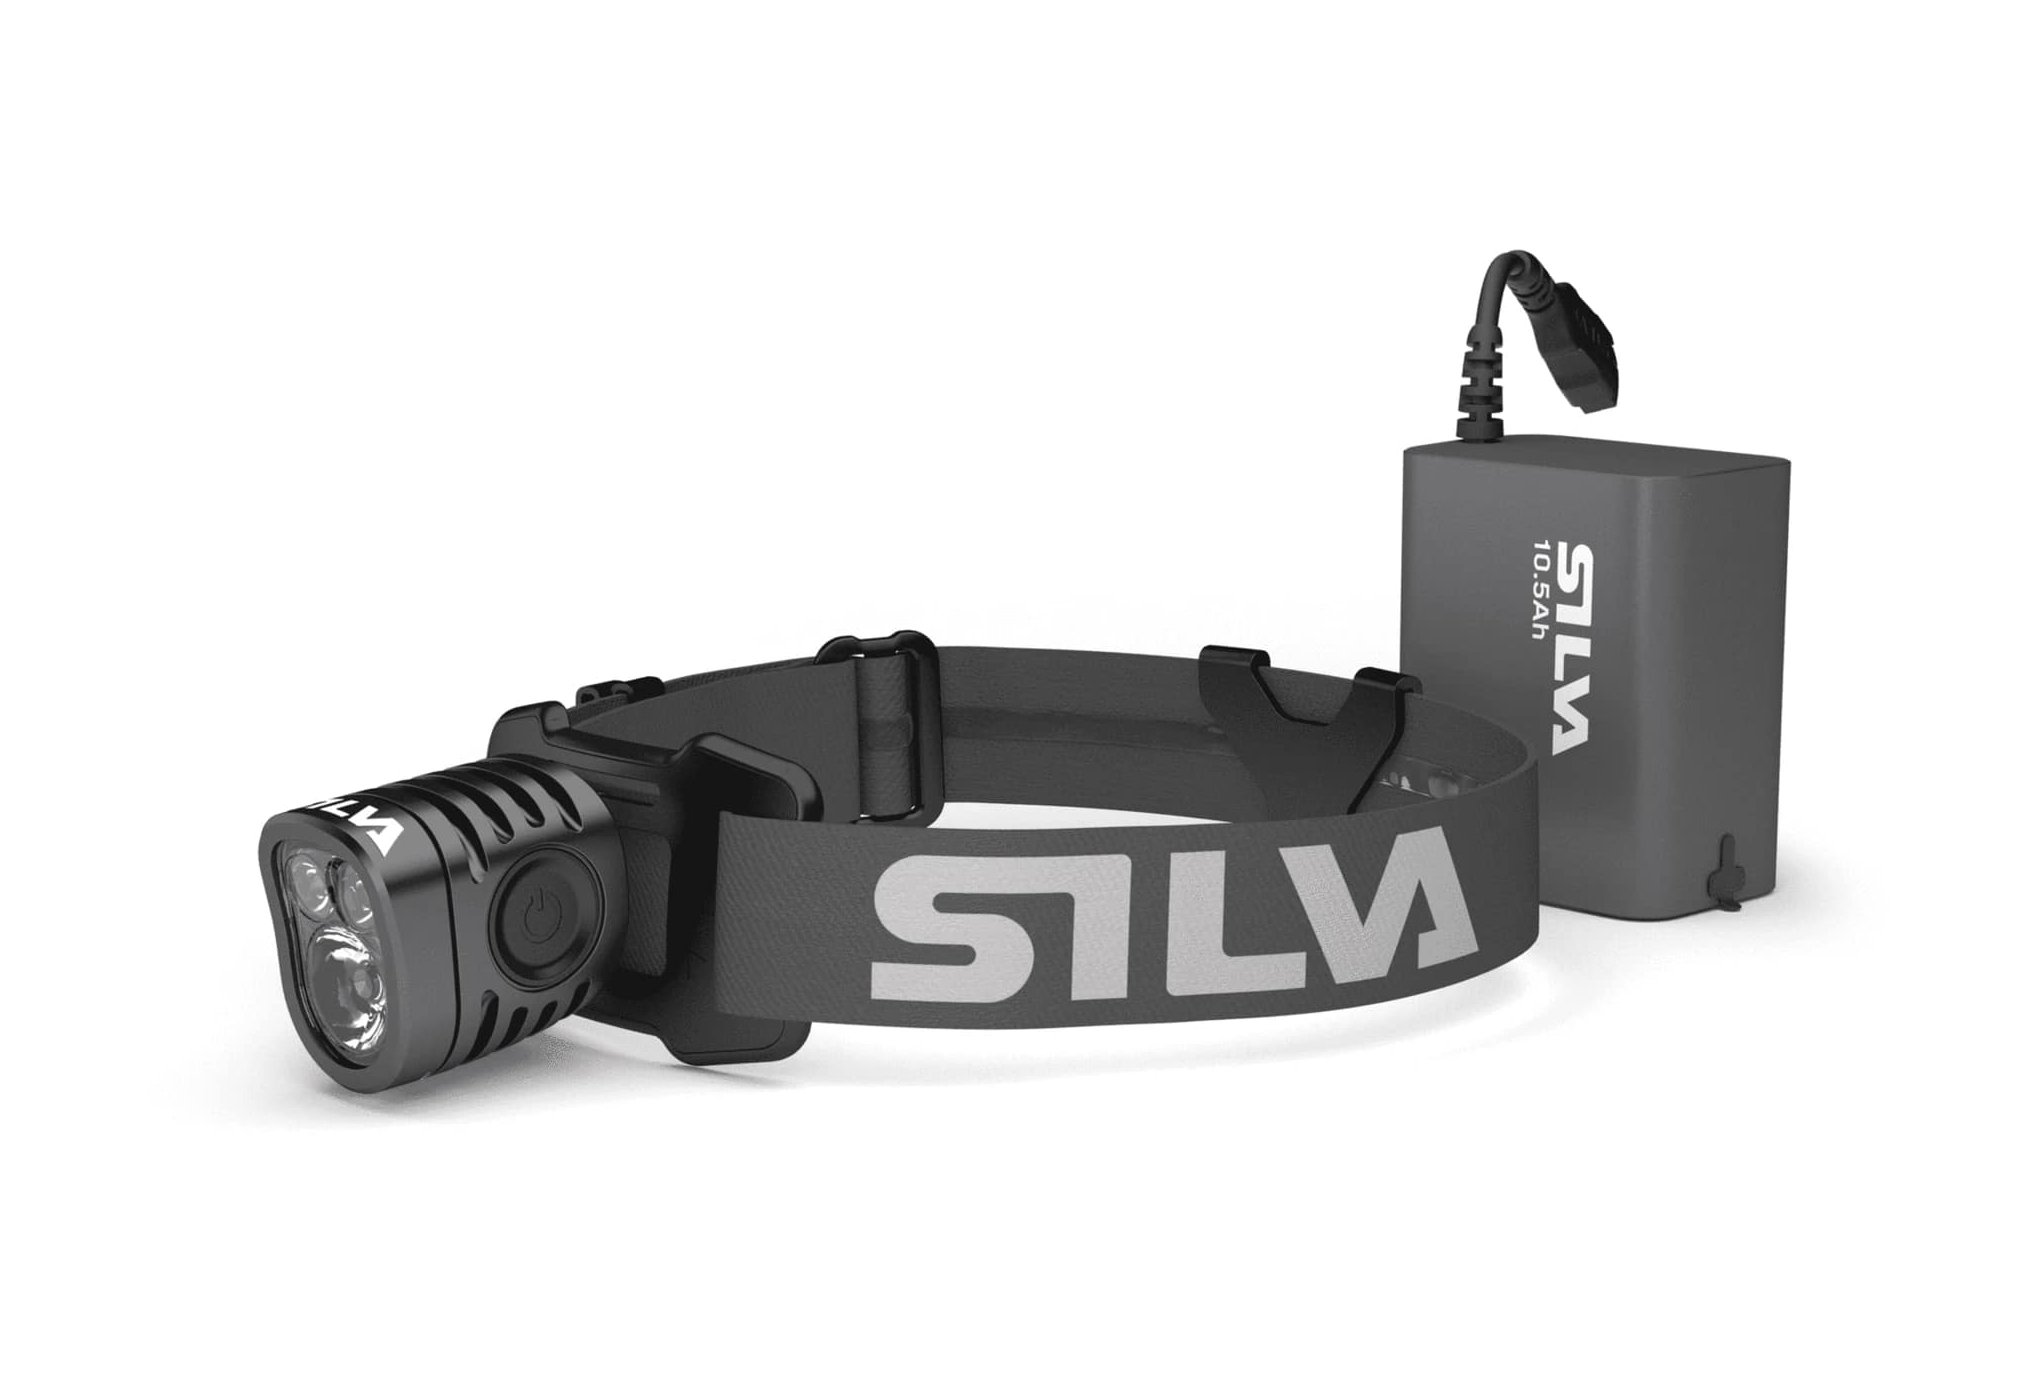 Silva Exceed 4XT Lampe frontale / éclairage